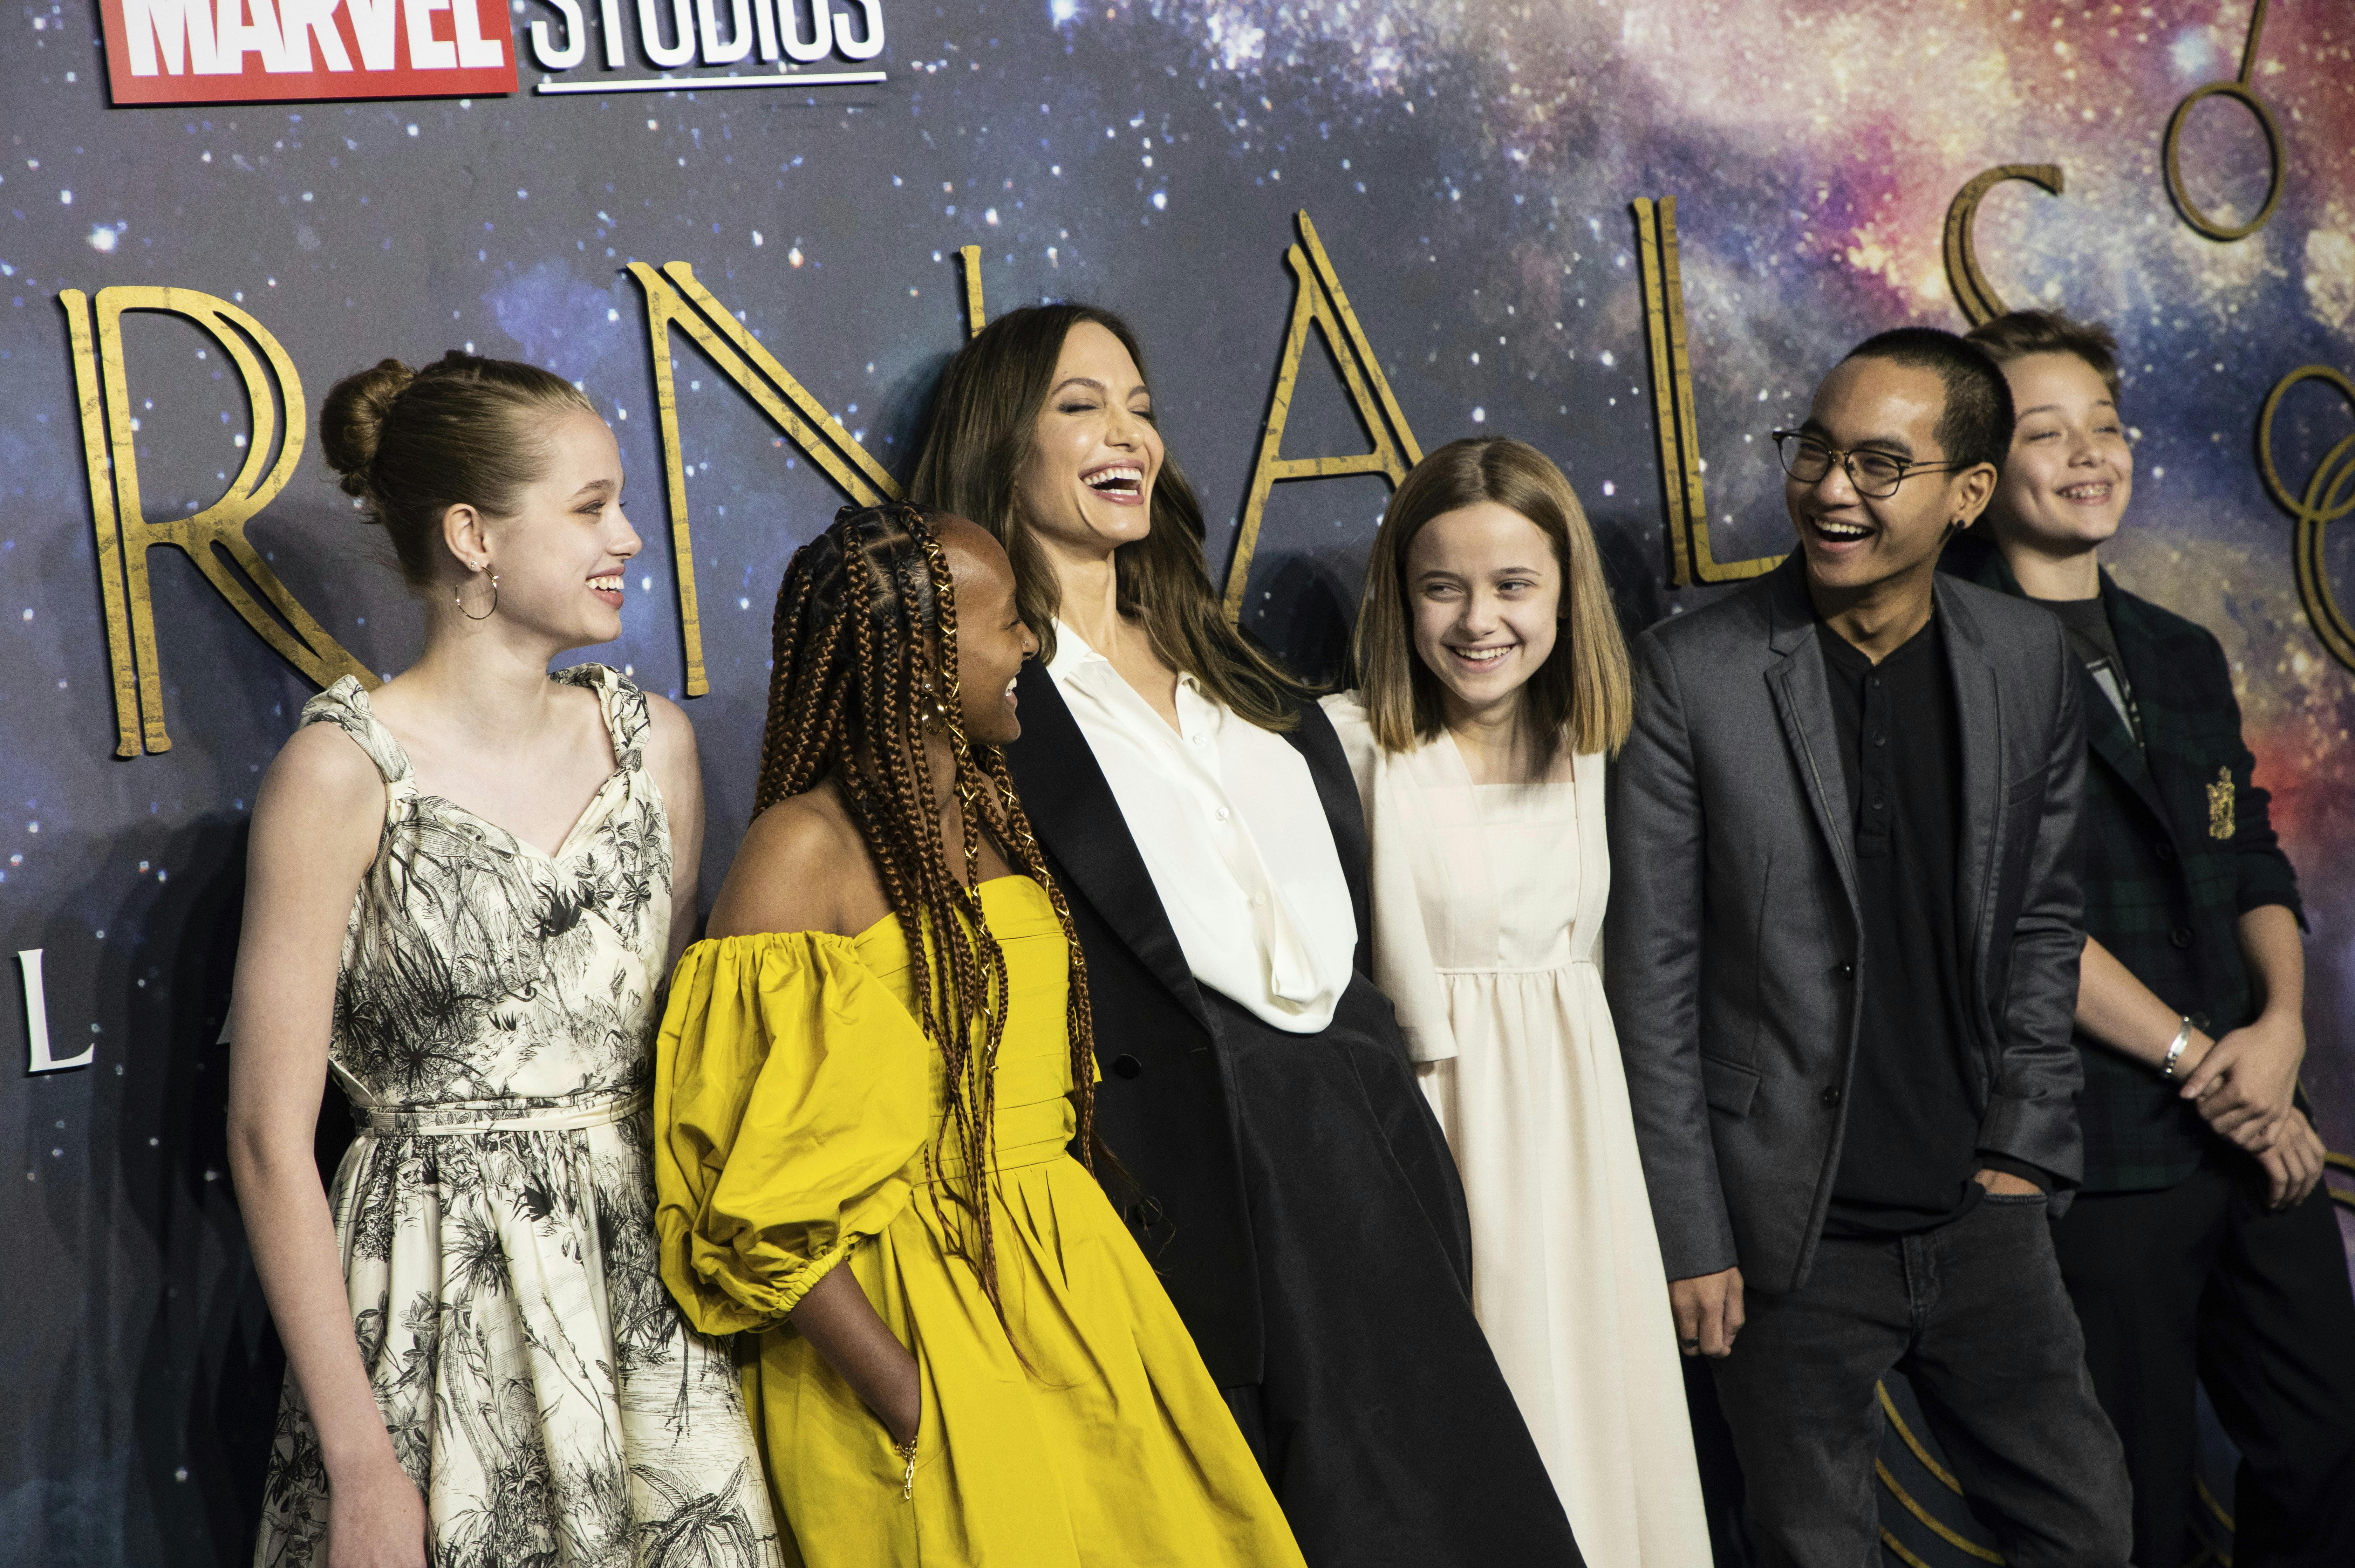 Shiloh Jolie-Pitt, from left, Zahara Jolie-Pitt, Angelina Jolie, Vivienne Jolie-Pitt, Maddox Jolie-Pitt and Knox Jolie-Pitt pose for photographers upon arrival at the premiere of the film 'Eternals' on Wednesday, Oct. 27, 2021 in London. (Photo by Vianney Le Caer/Invision/AP)